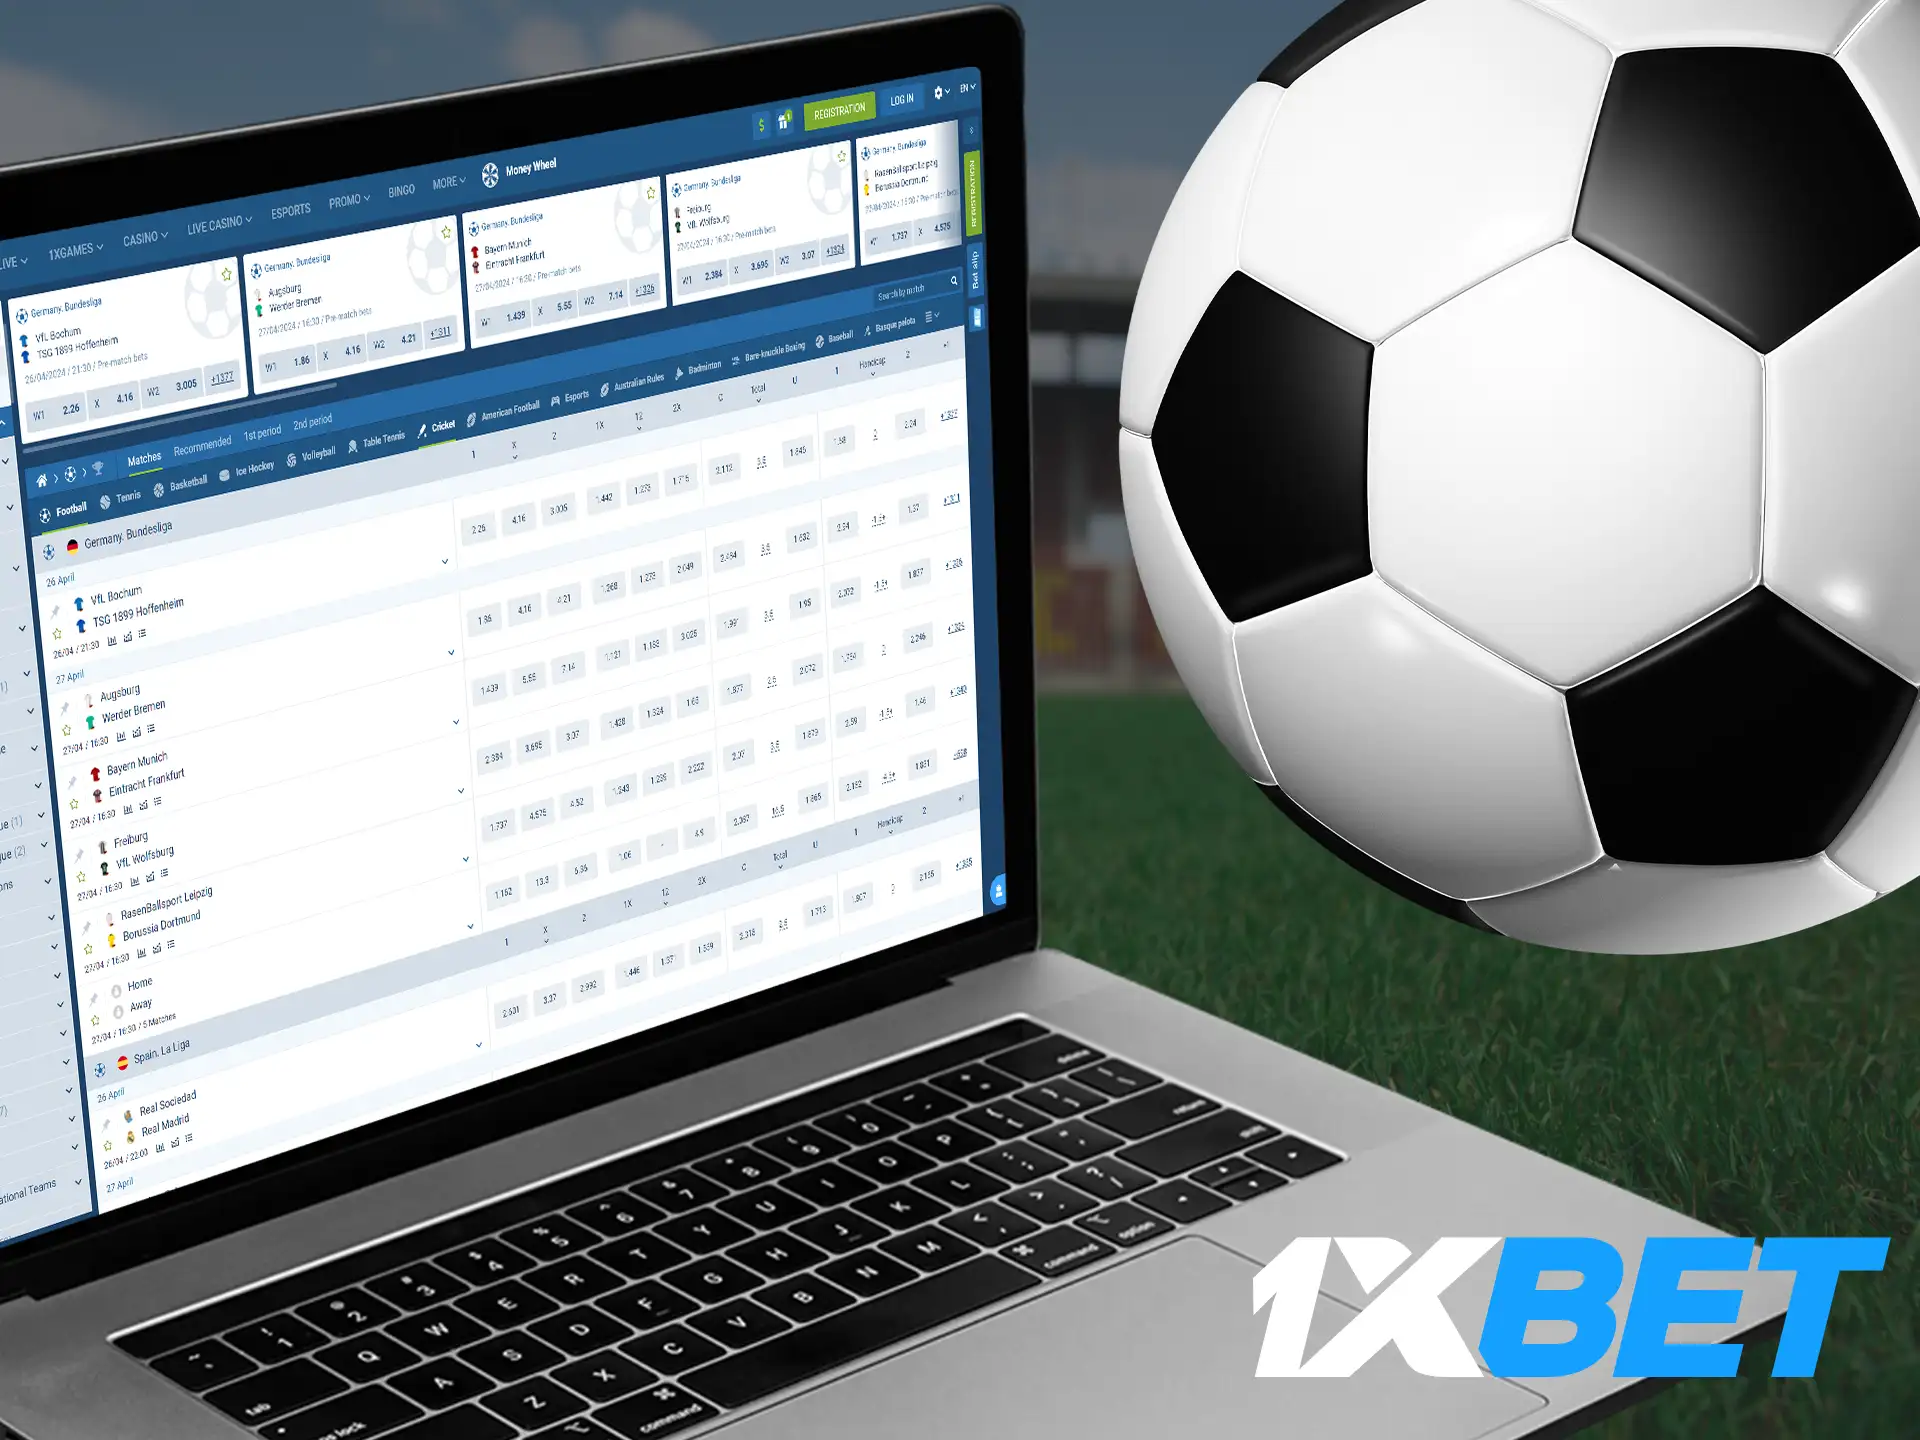 A wide range of football matches are offered on the 1xBet site for Indian punters to bet on.